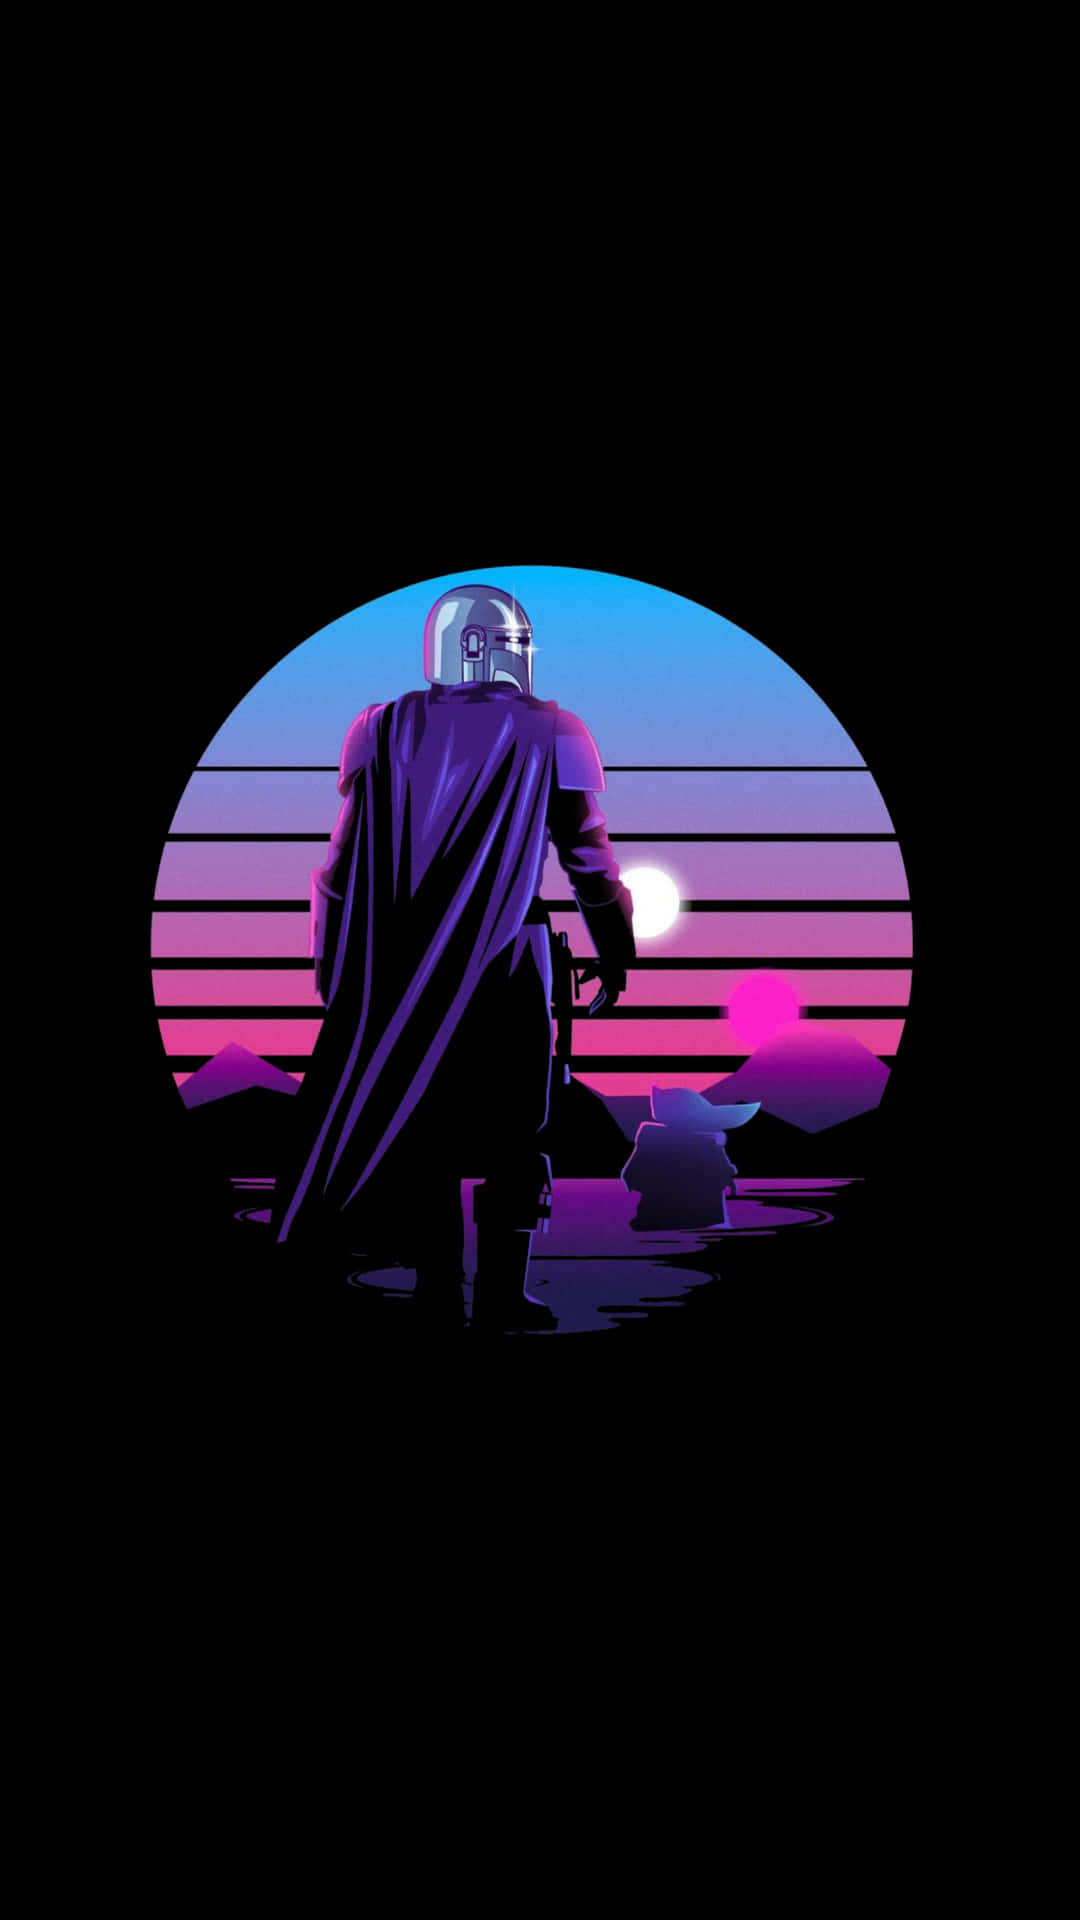 Feel the Force With the Star Wars Phone Wallpaper